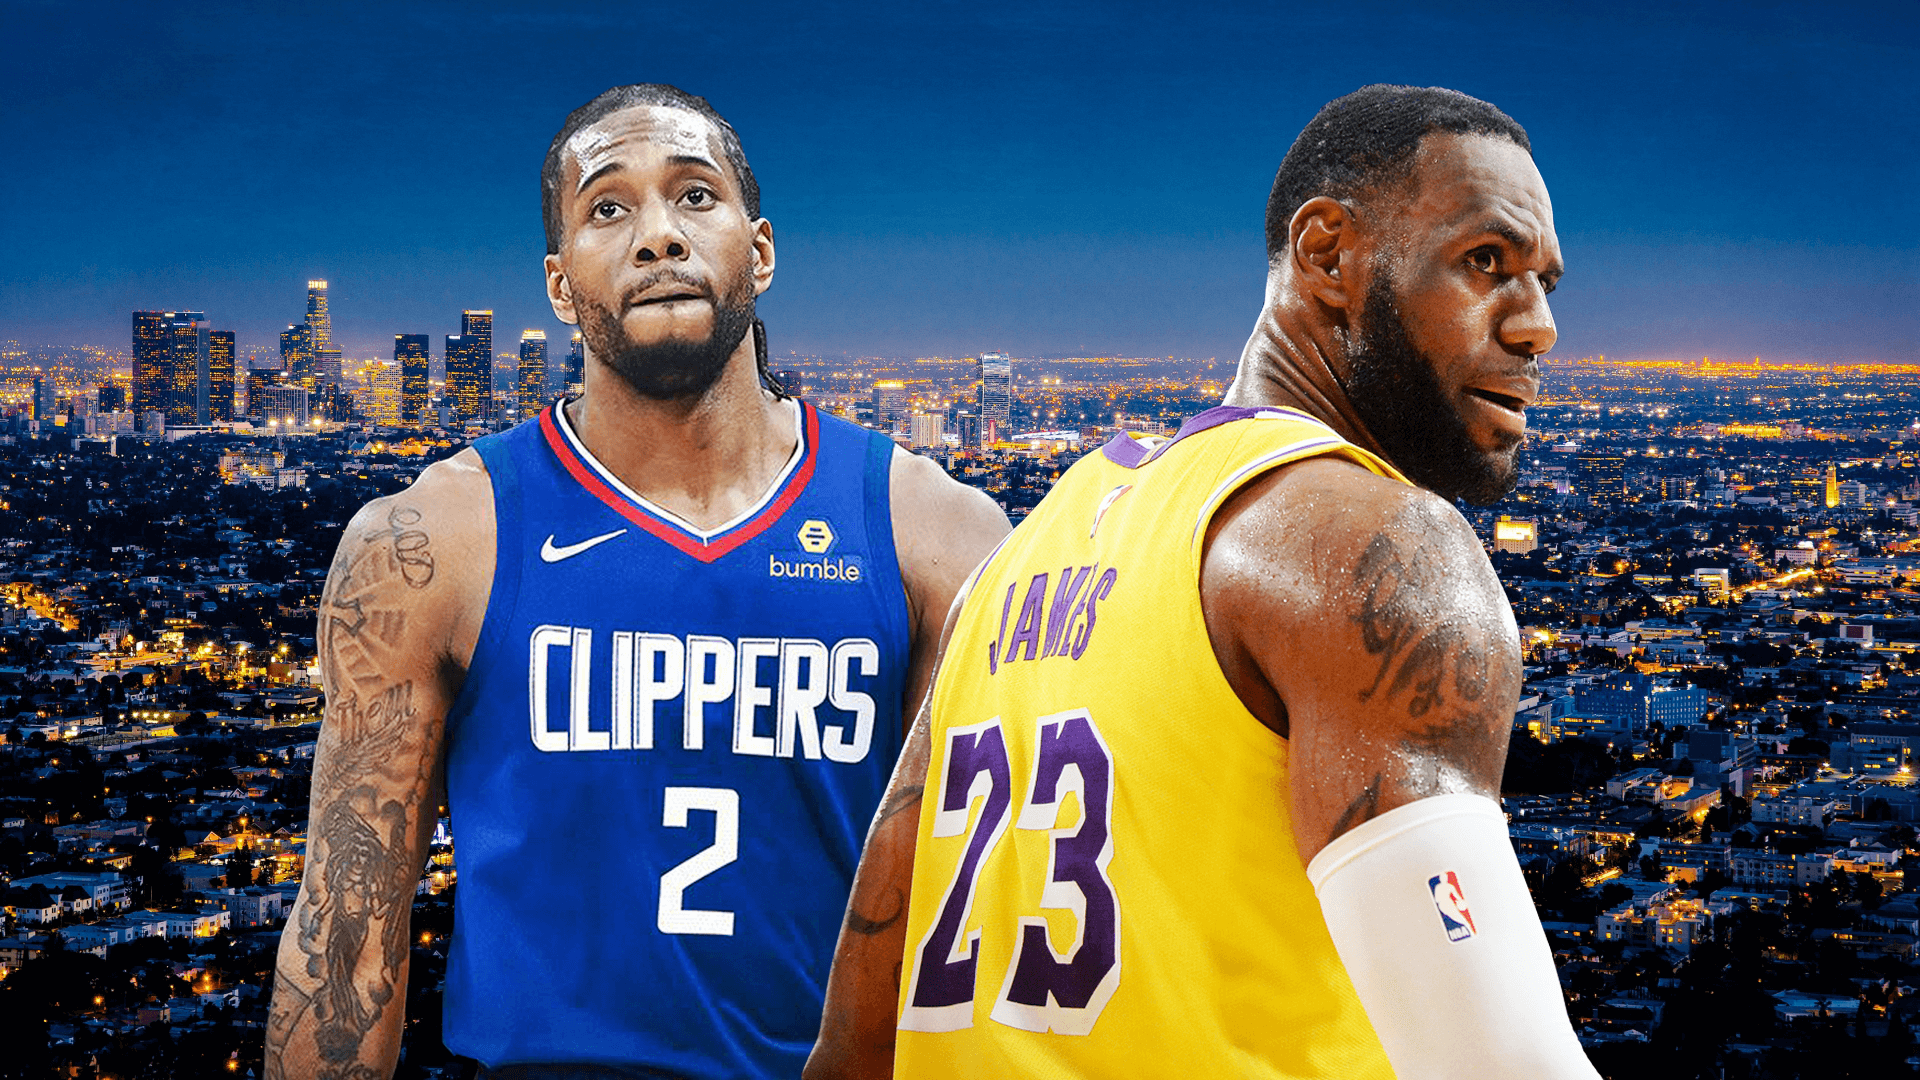 NBA 2020 Preview: The Battle of Los Angeles | Joker Mag